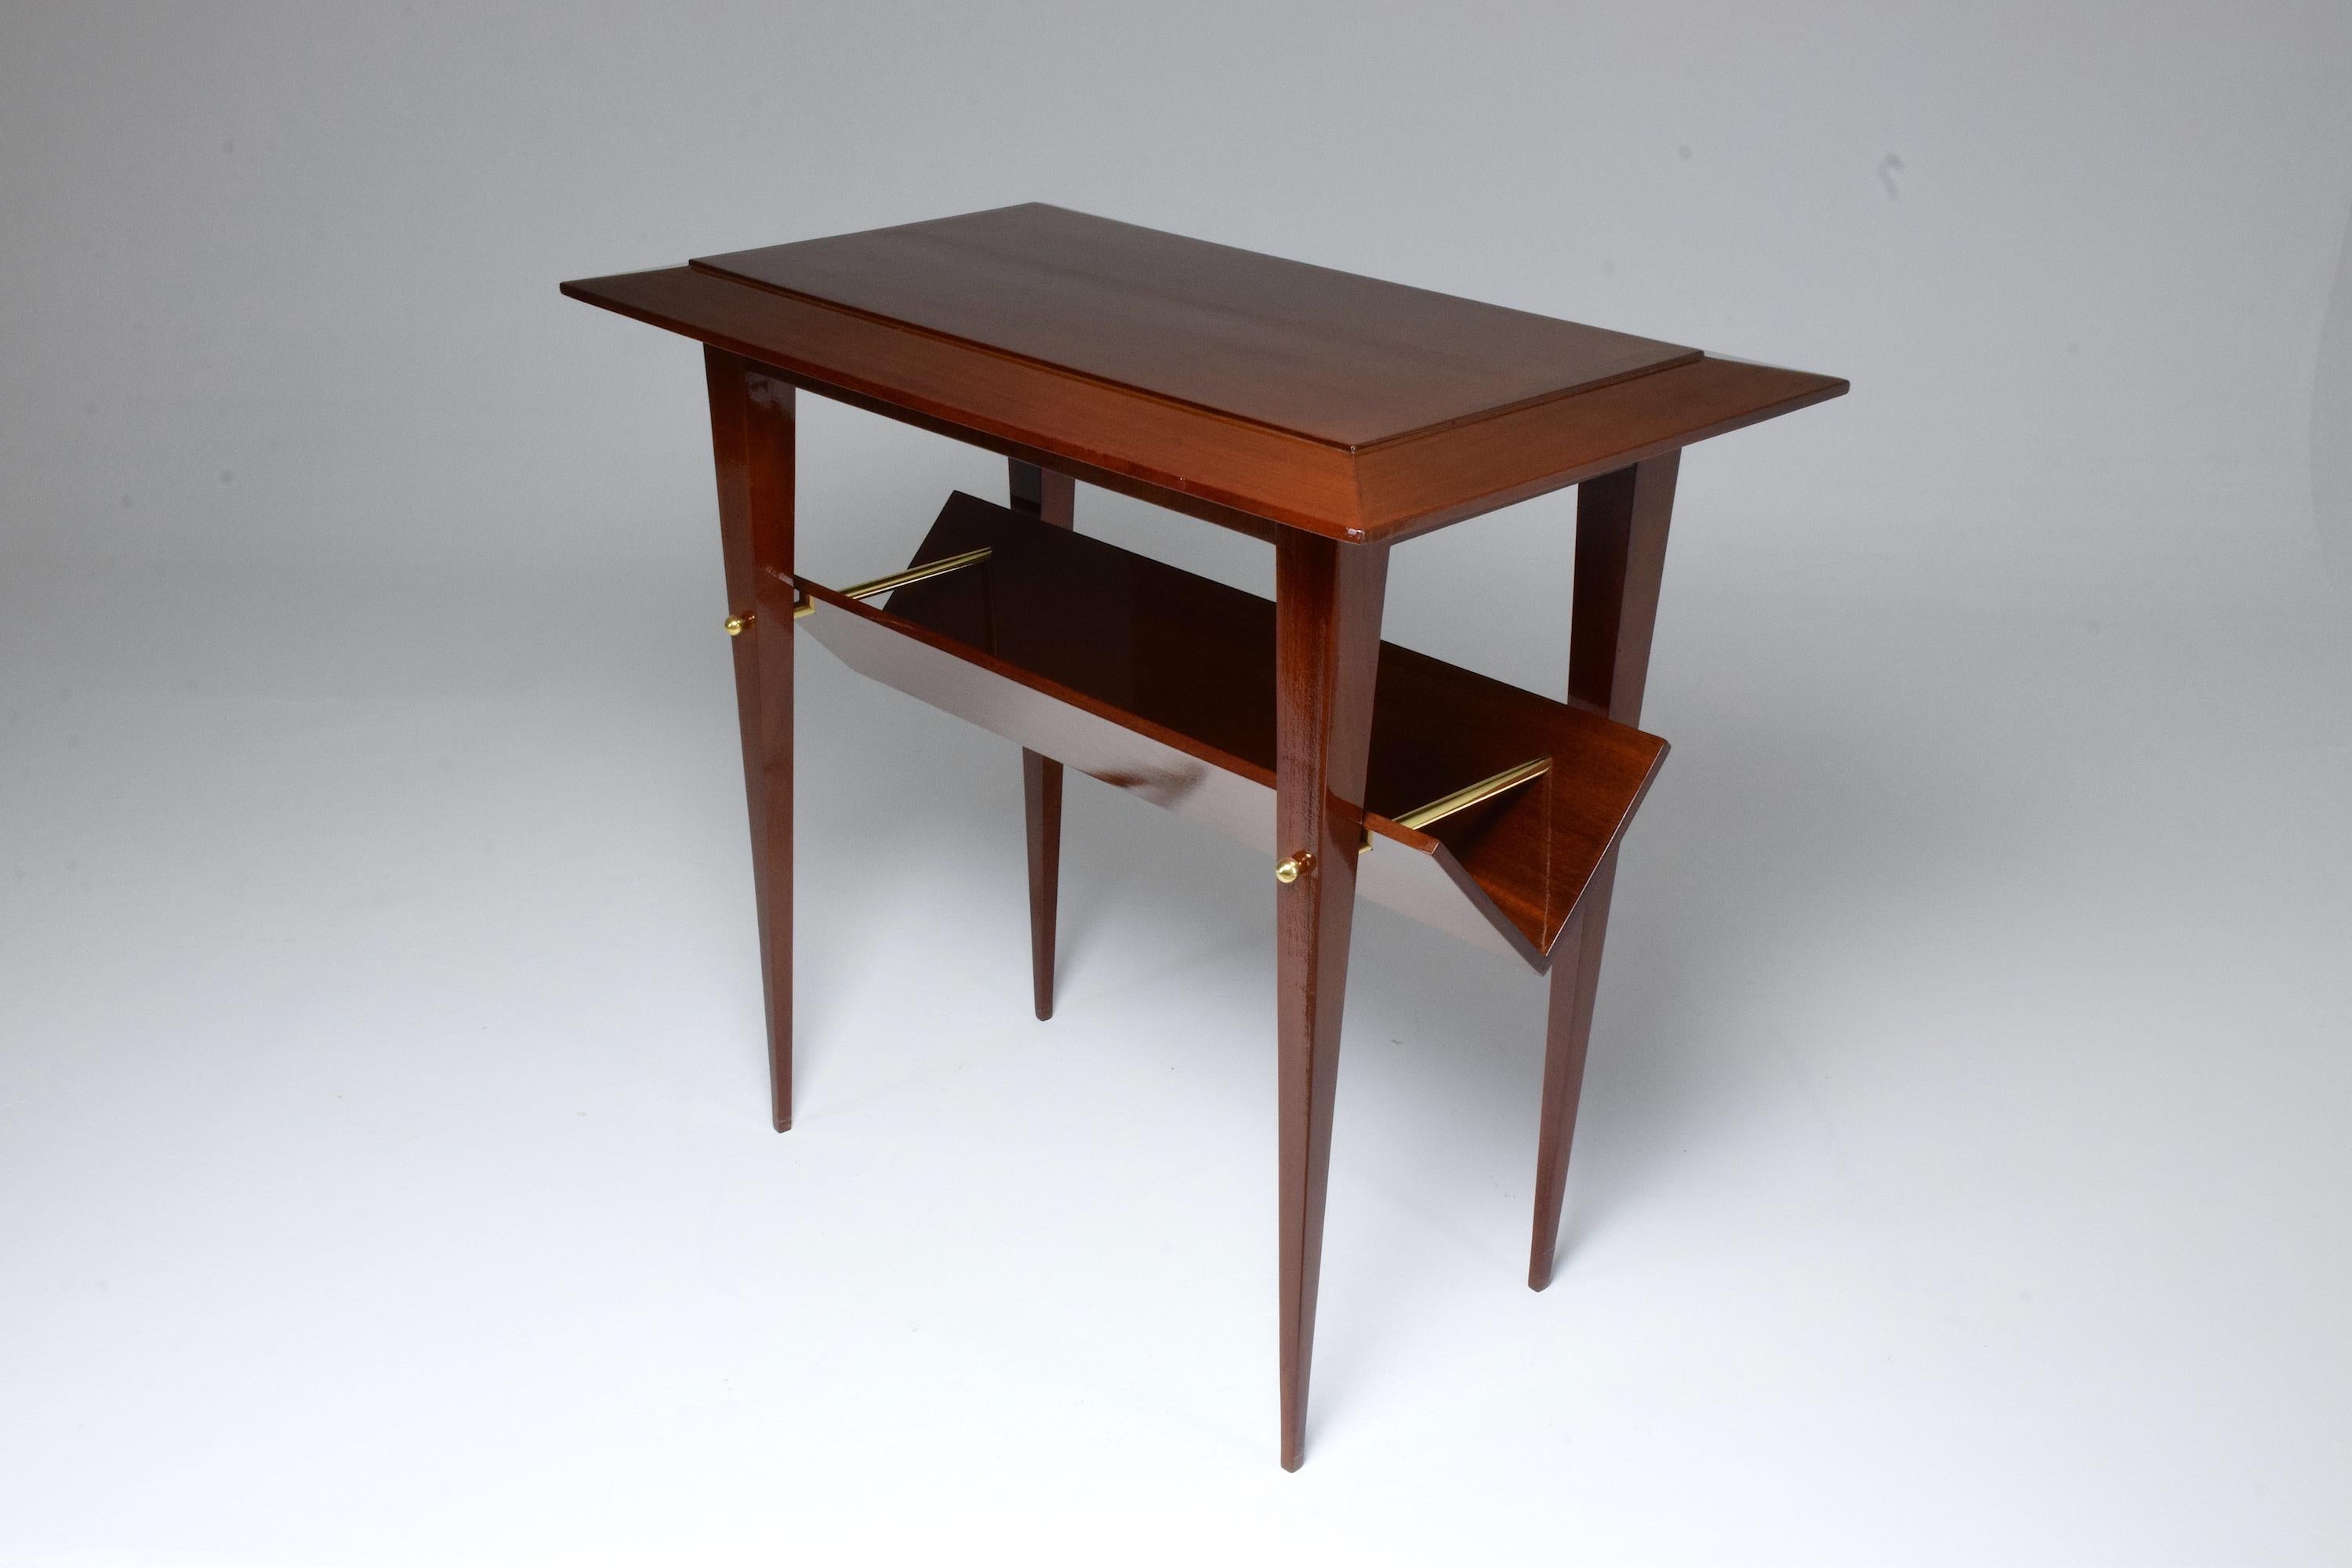 A timeless French 20th-century vintage high quality mahogany two-tier side or end table with tapered legs and brass details attributed to Raphael.
It is designed with an angular shaped shelf storage space dedicated to newspapers and magazines. An